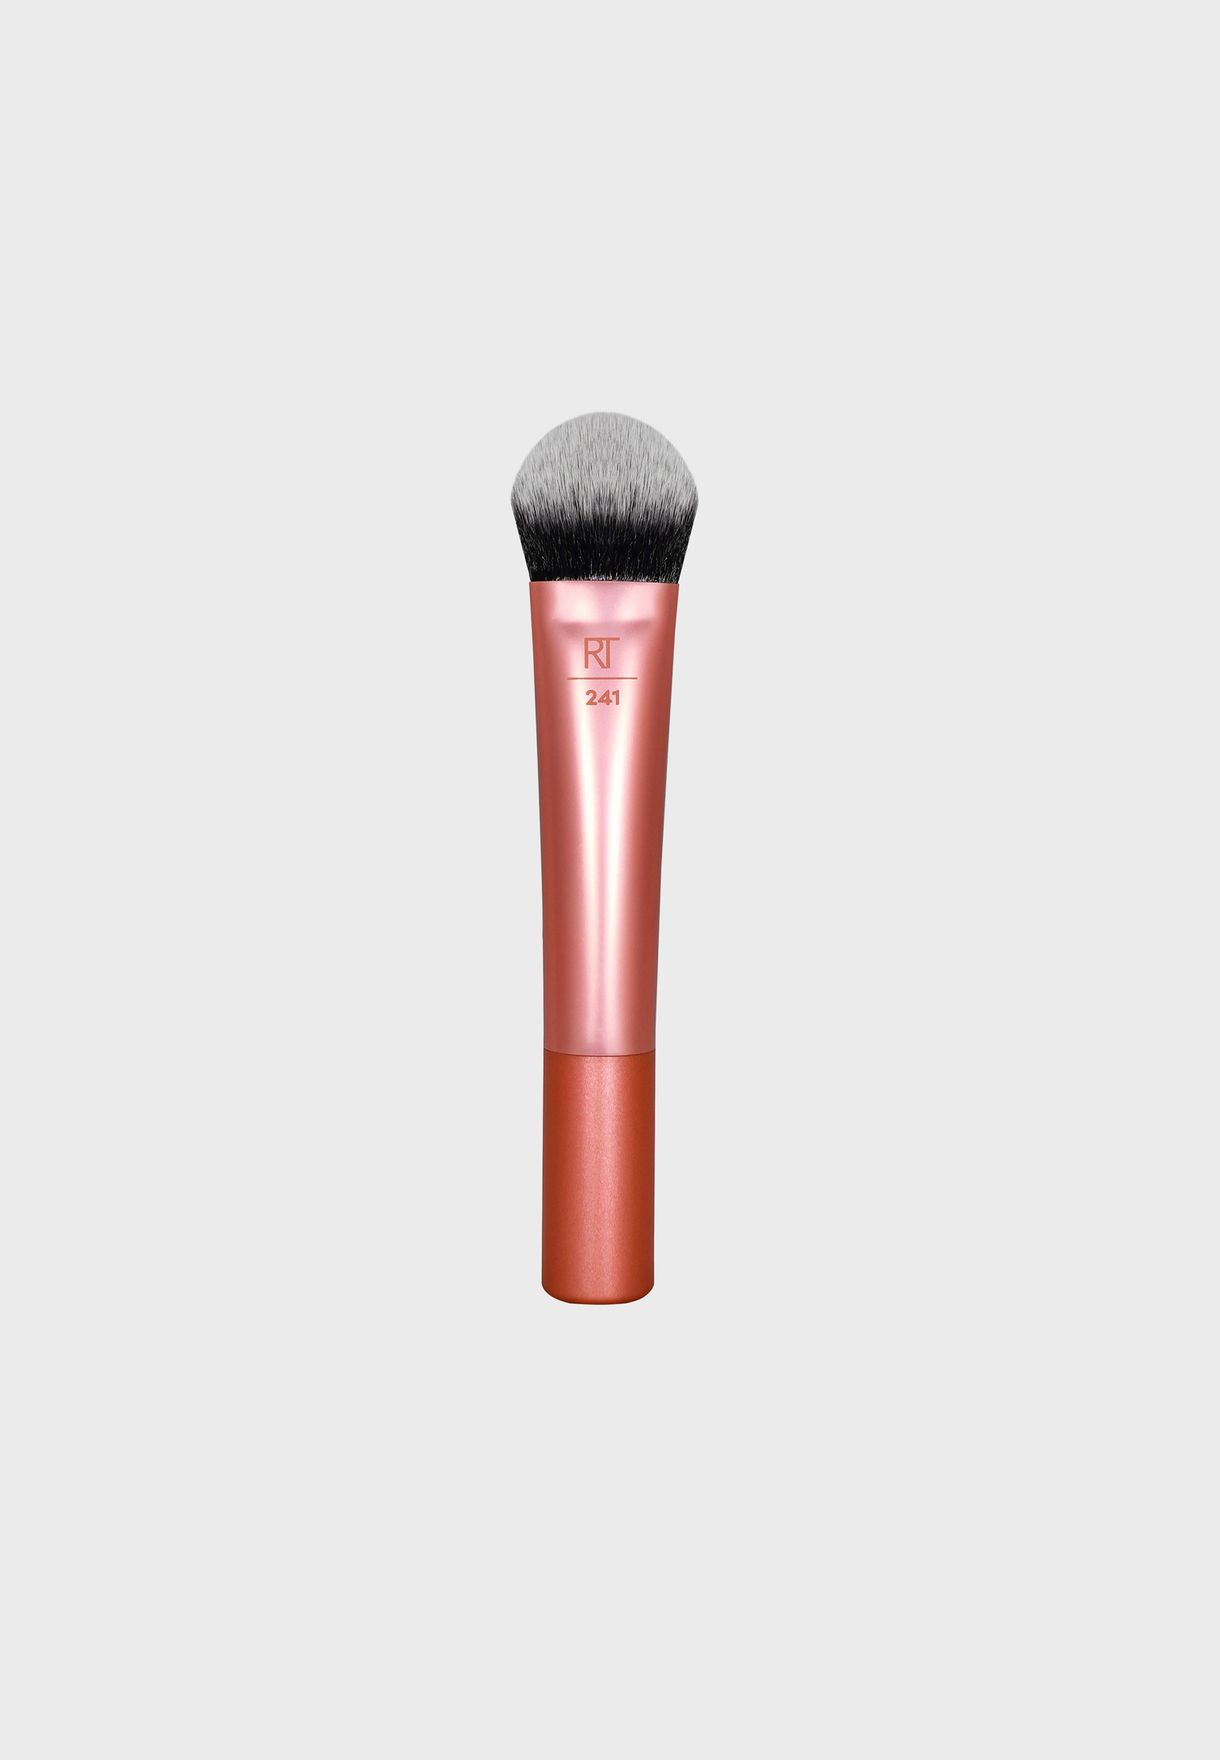 Seamless Complexion Brush - RT 241